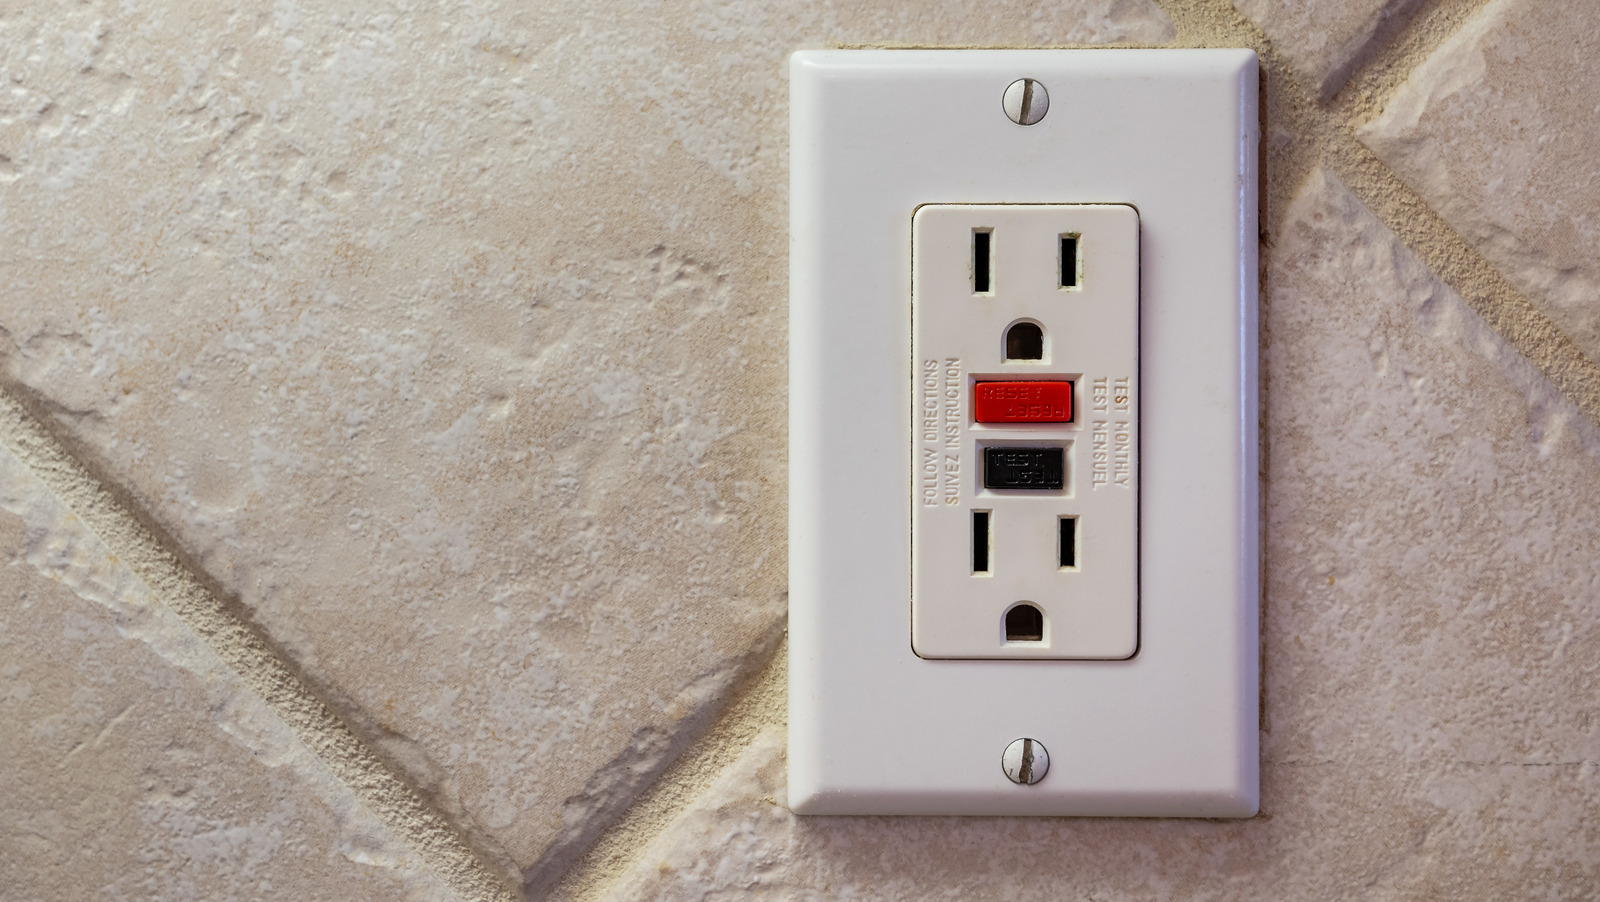 https://www.housedigest.com/img/gallery/10-types-of-electrical-outlets-commonly-found-in-every-home/l-intro-1646241291.jpg